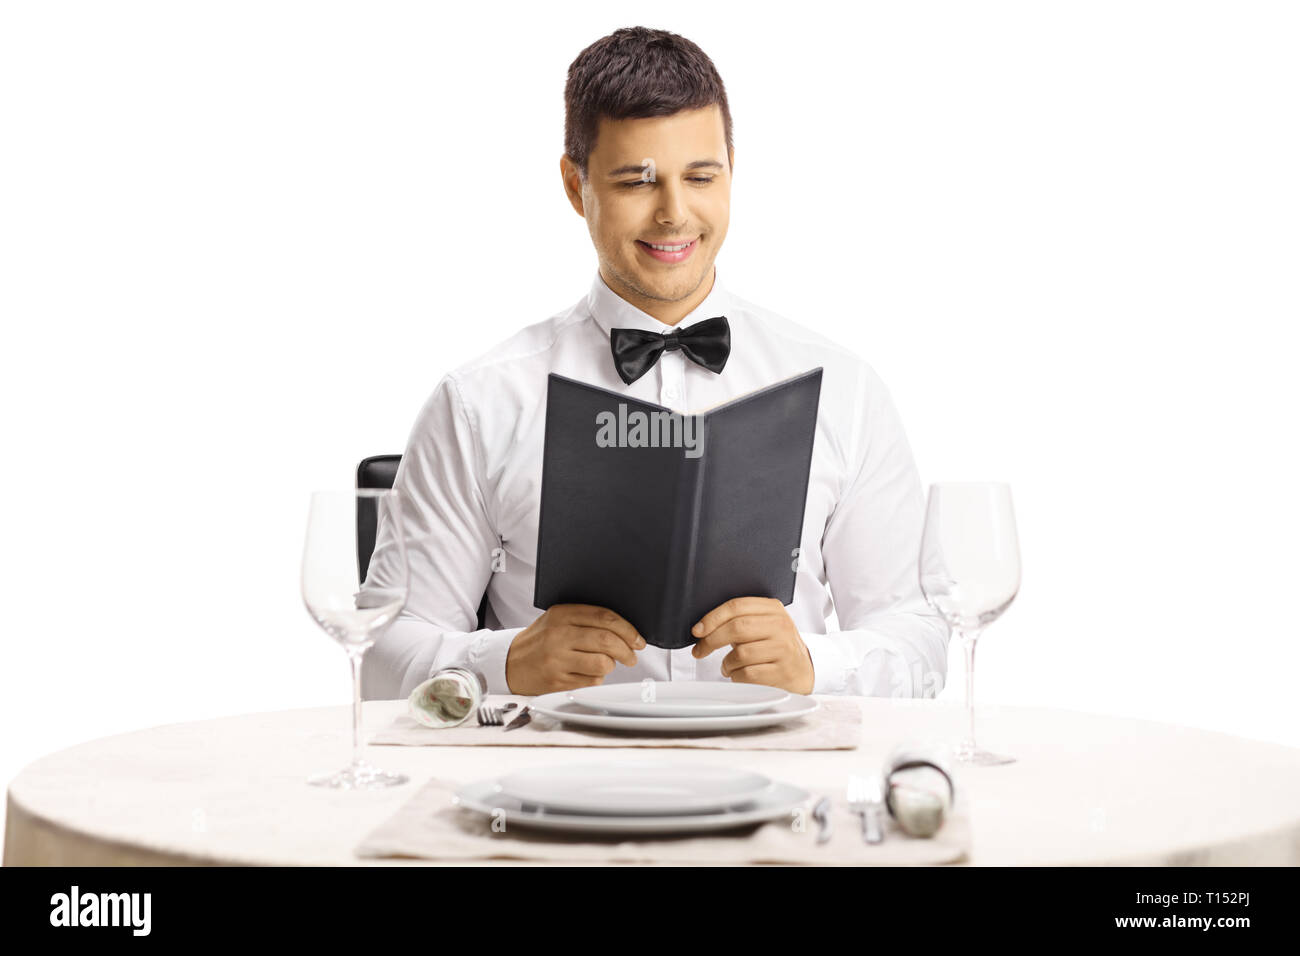 Young handsome man at a restaurant table reading a menu isolated on white background Stock Photo